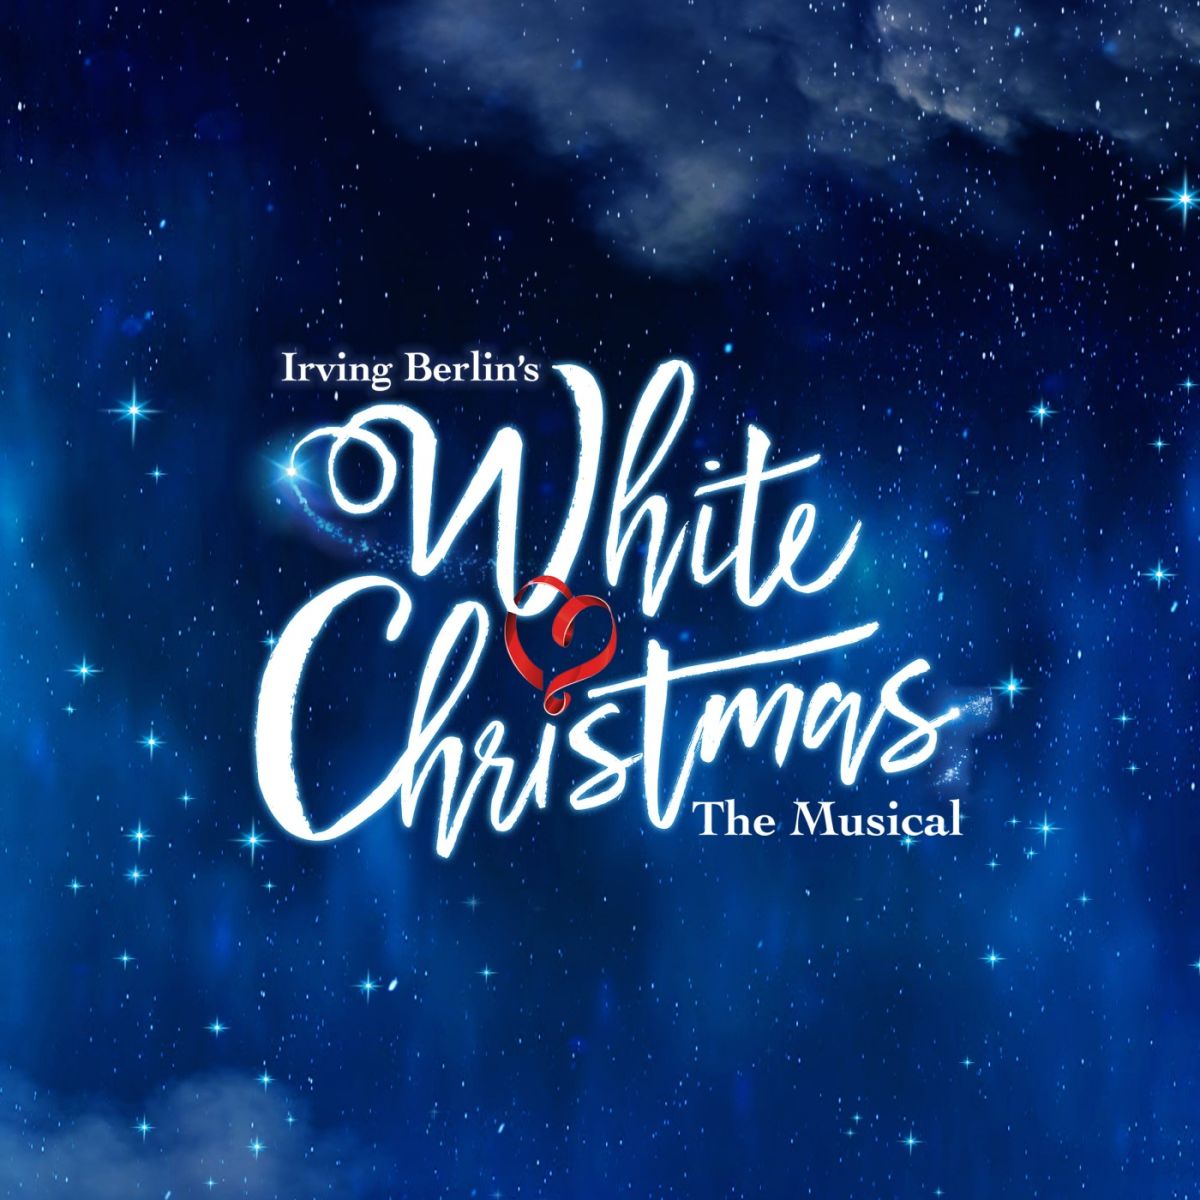 Palace Theatre Manchester is dreaming of a White Christmas